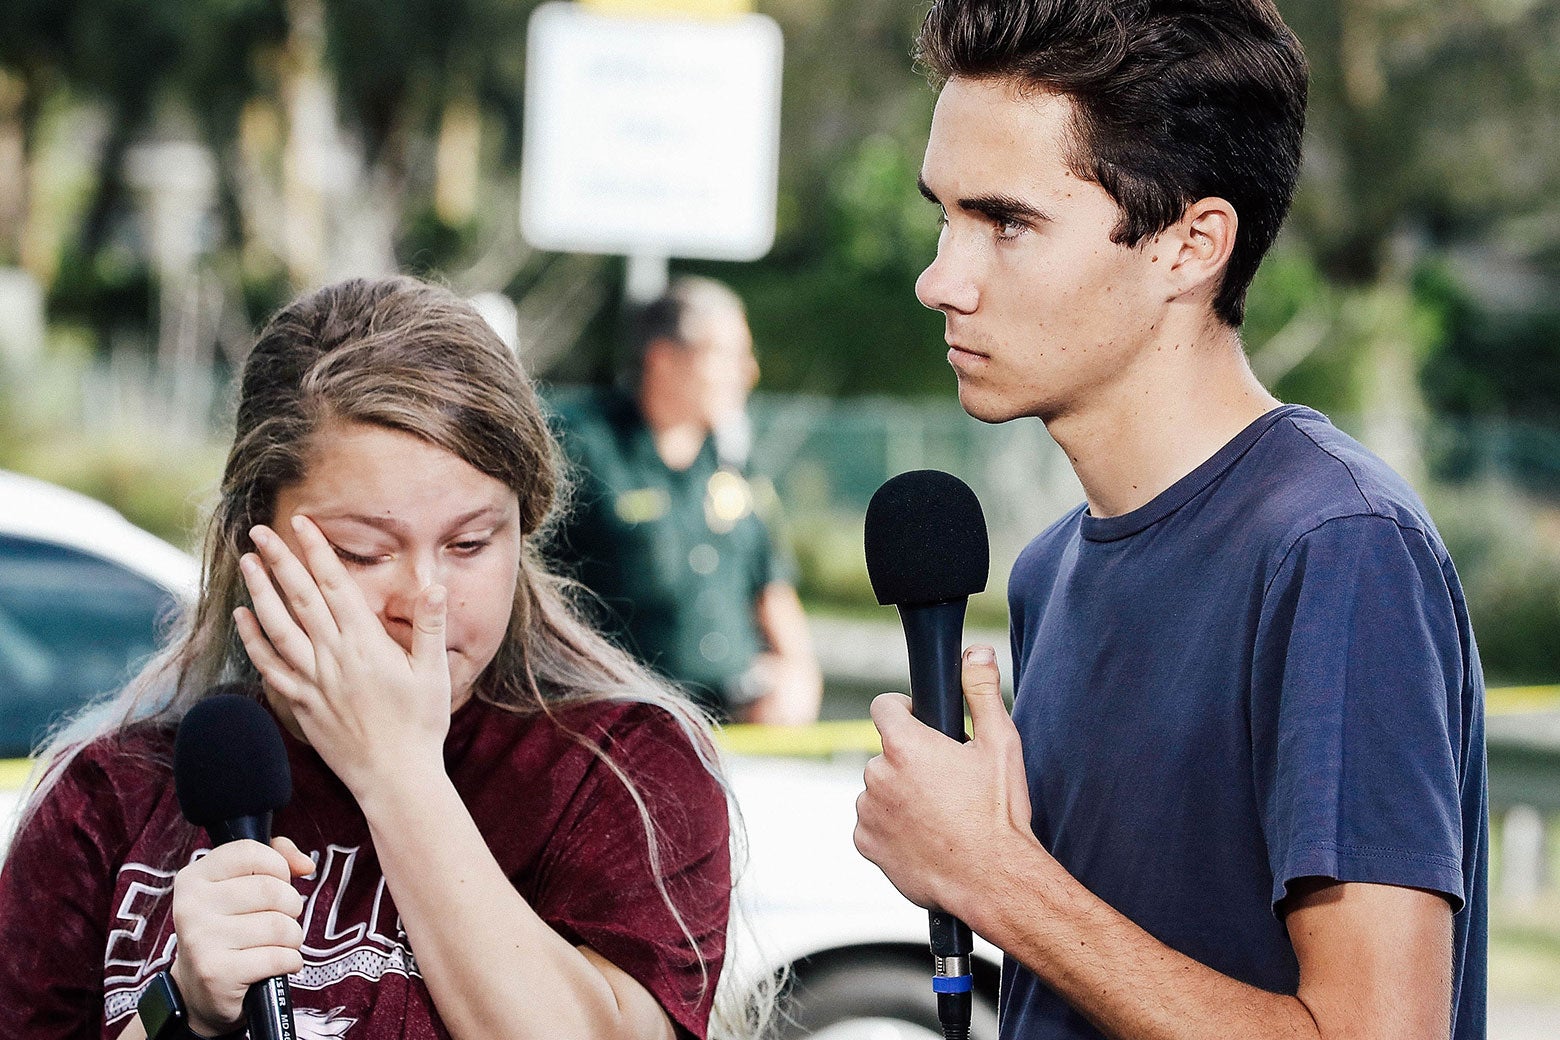 Kelsey Friend and David Hogg, holding microphones.